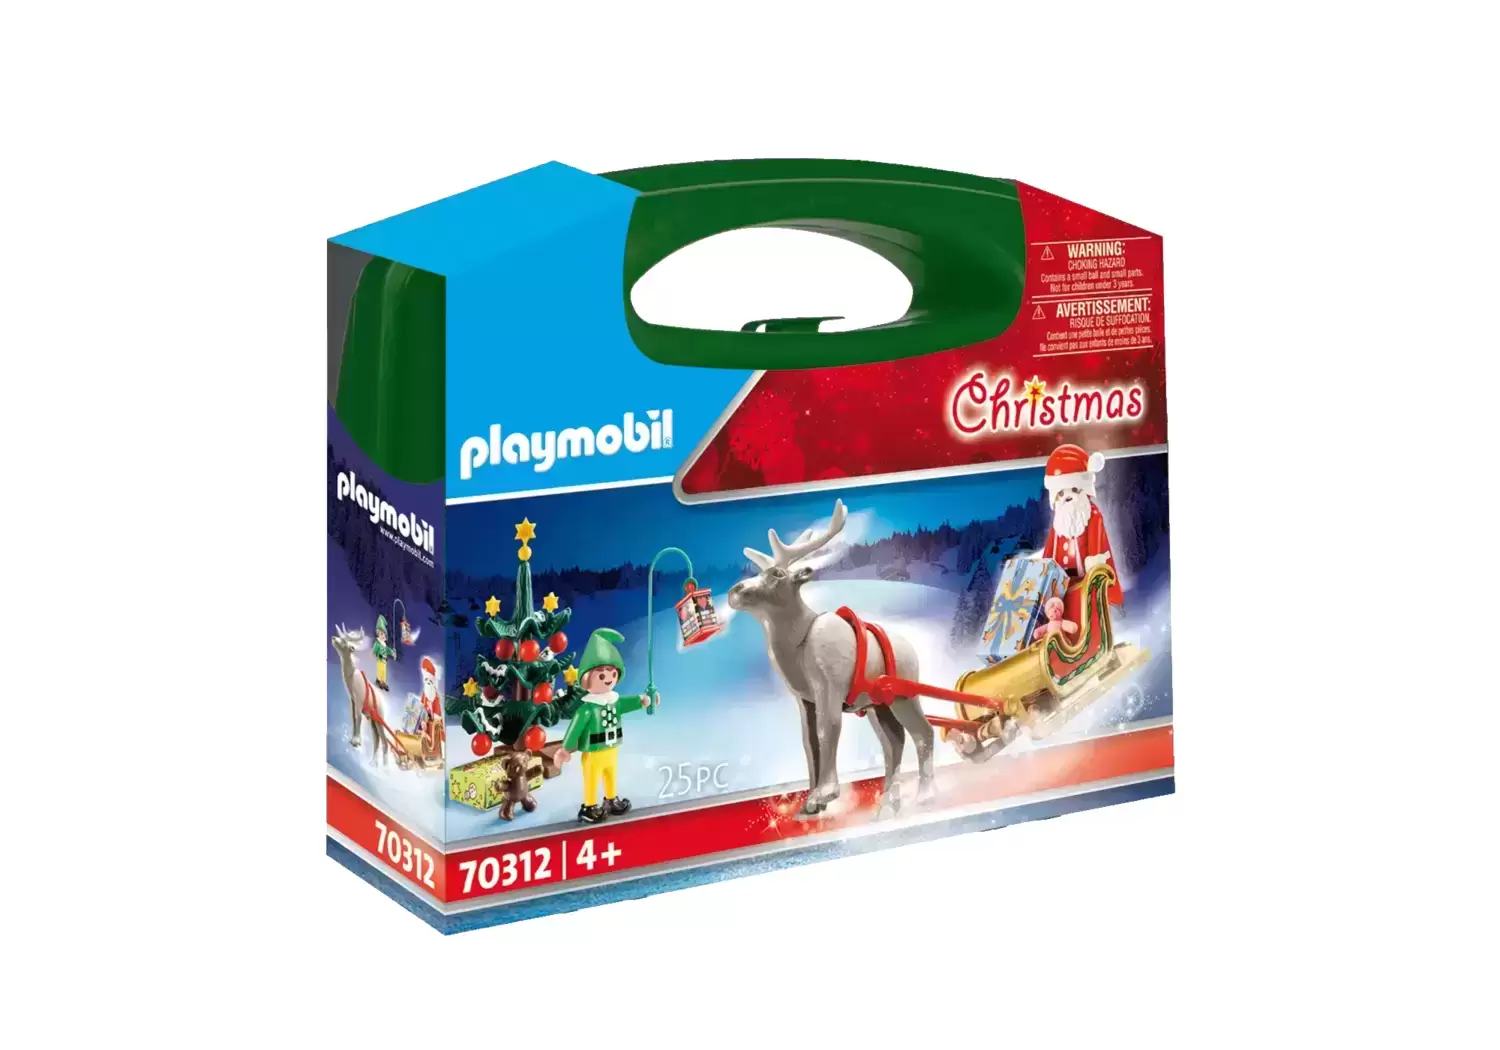 Playmobil Xmas - Carry Case with Father Christmas